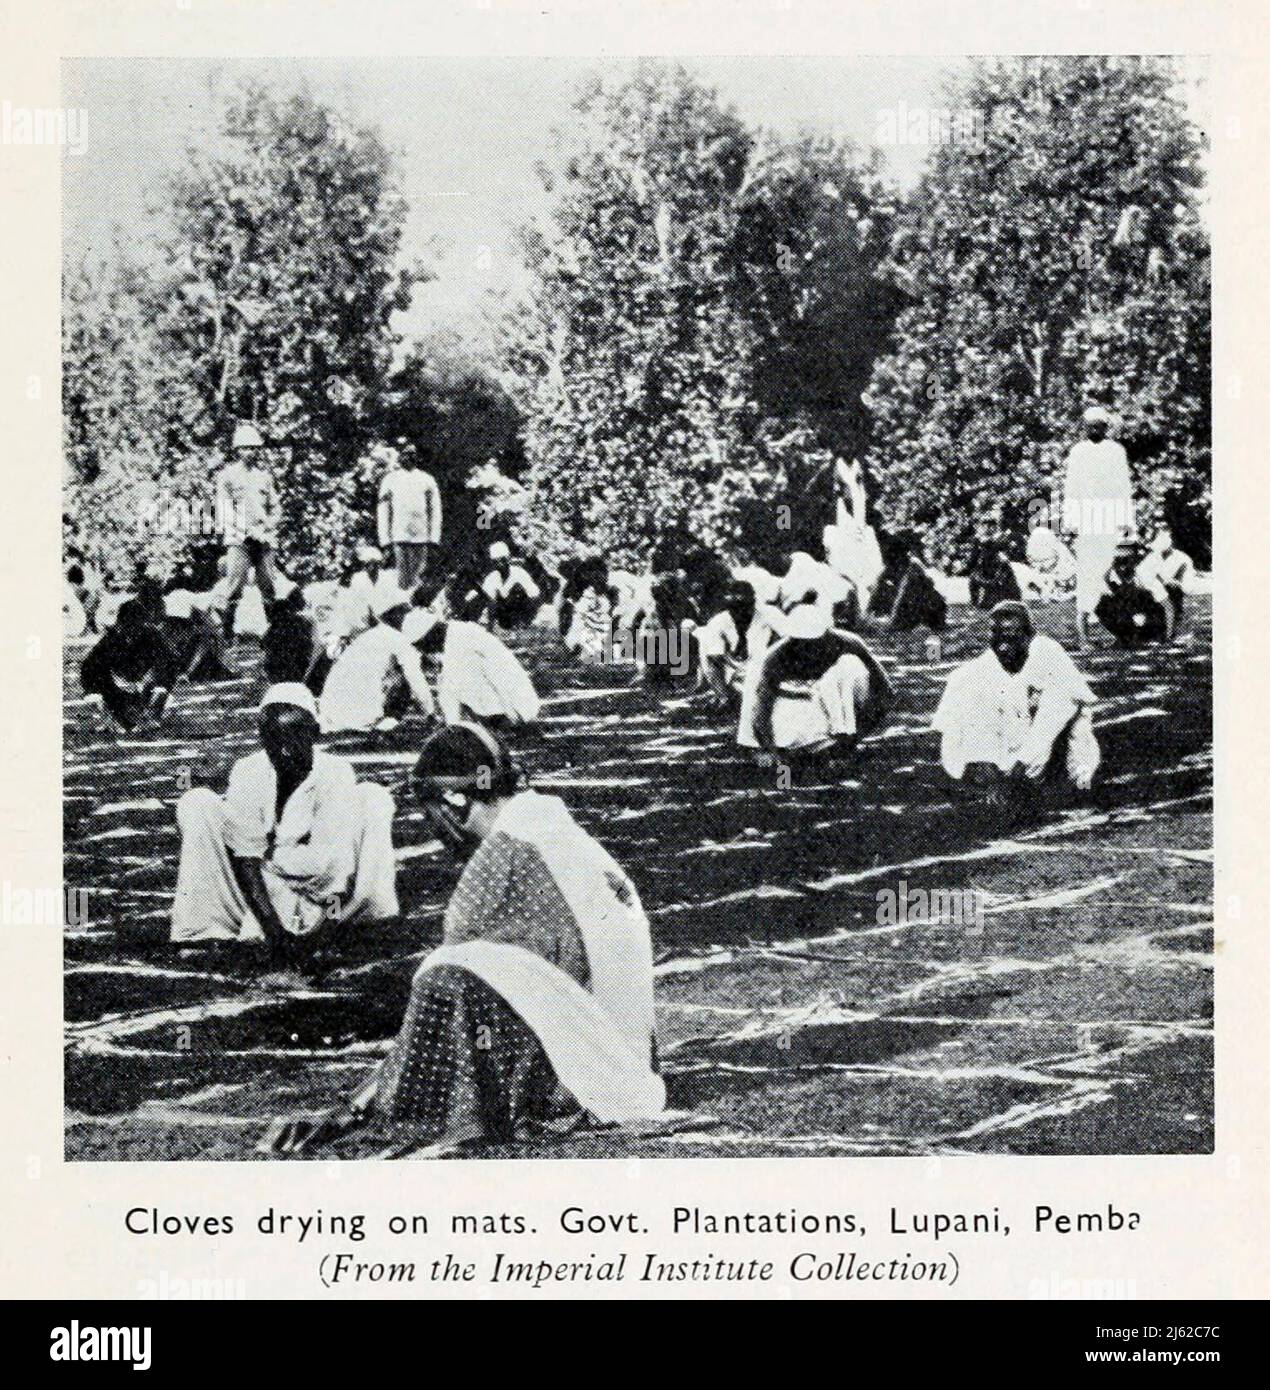 Cloves drying on mats. Govt. Plantations, Lupani, Pemba from the book ' The romance of Empire drugs ' Published in London by the Scientific Department at Stafford Allen and Sons, Ltd Stock Photo